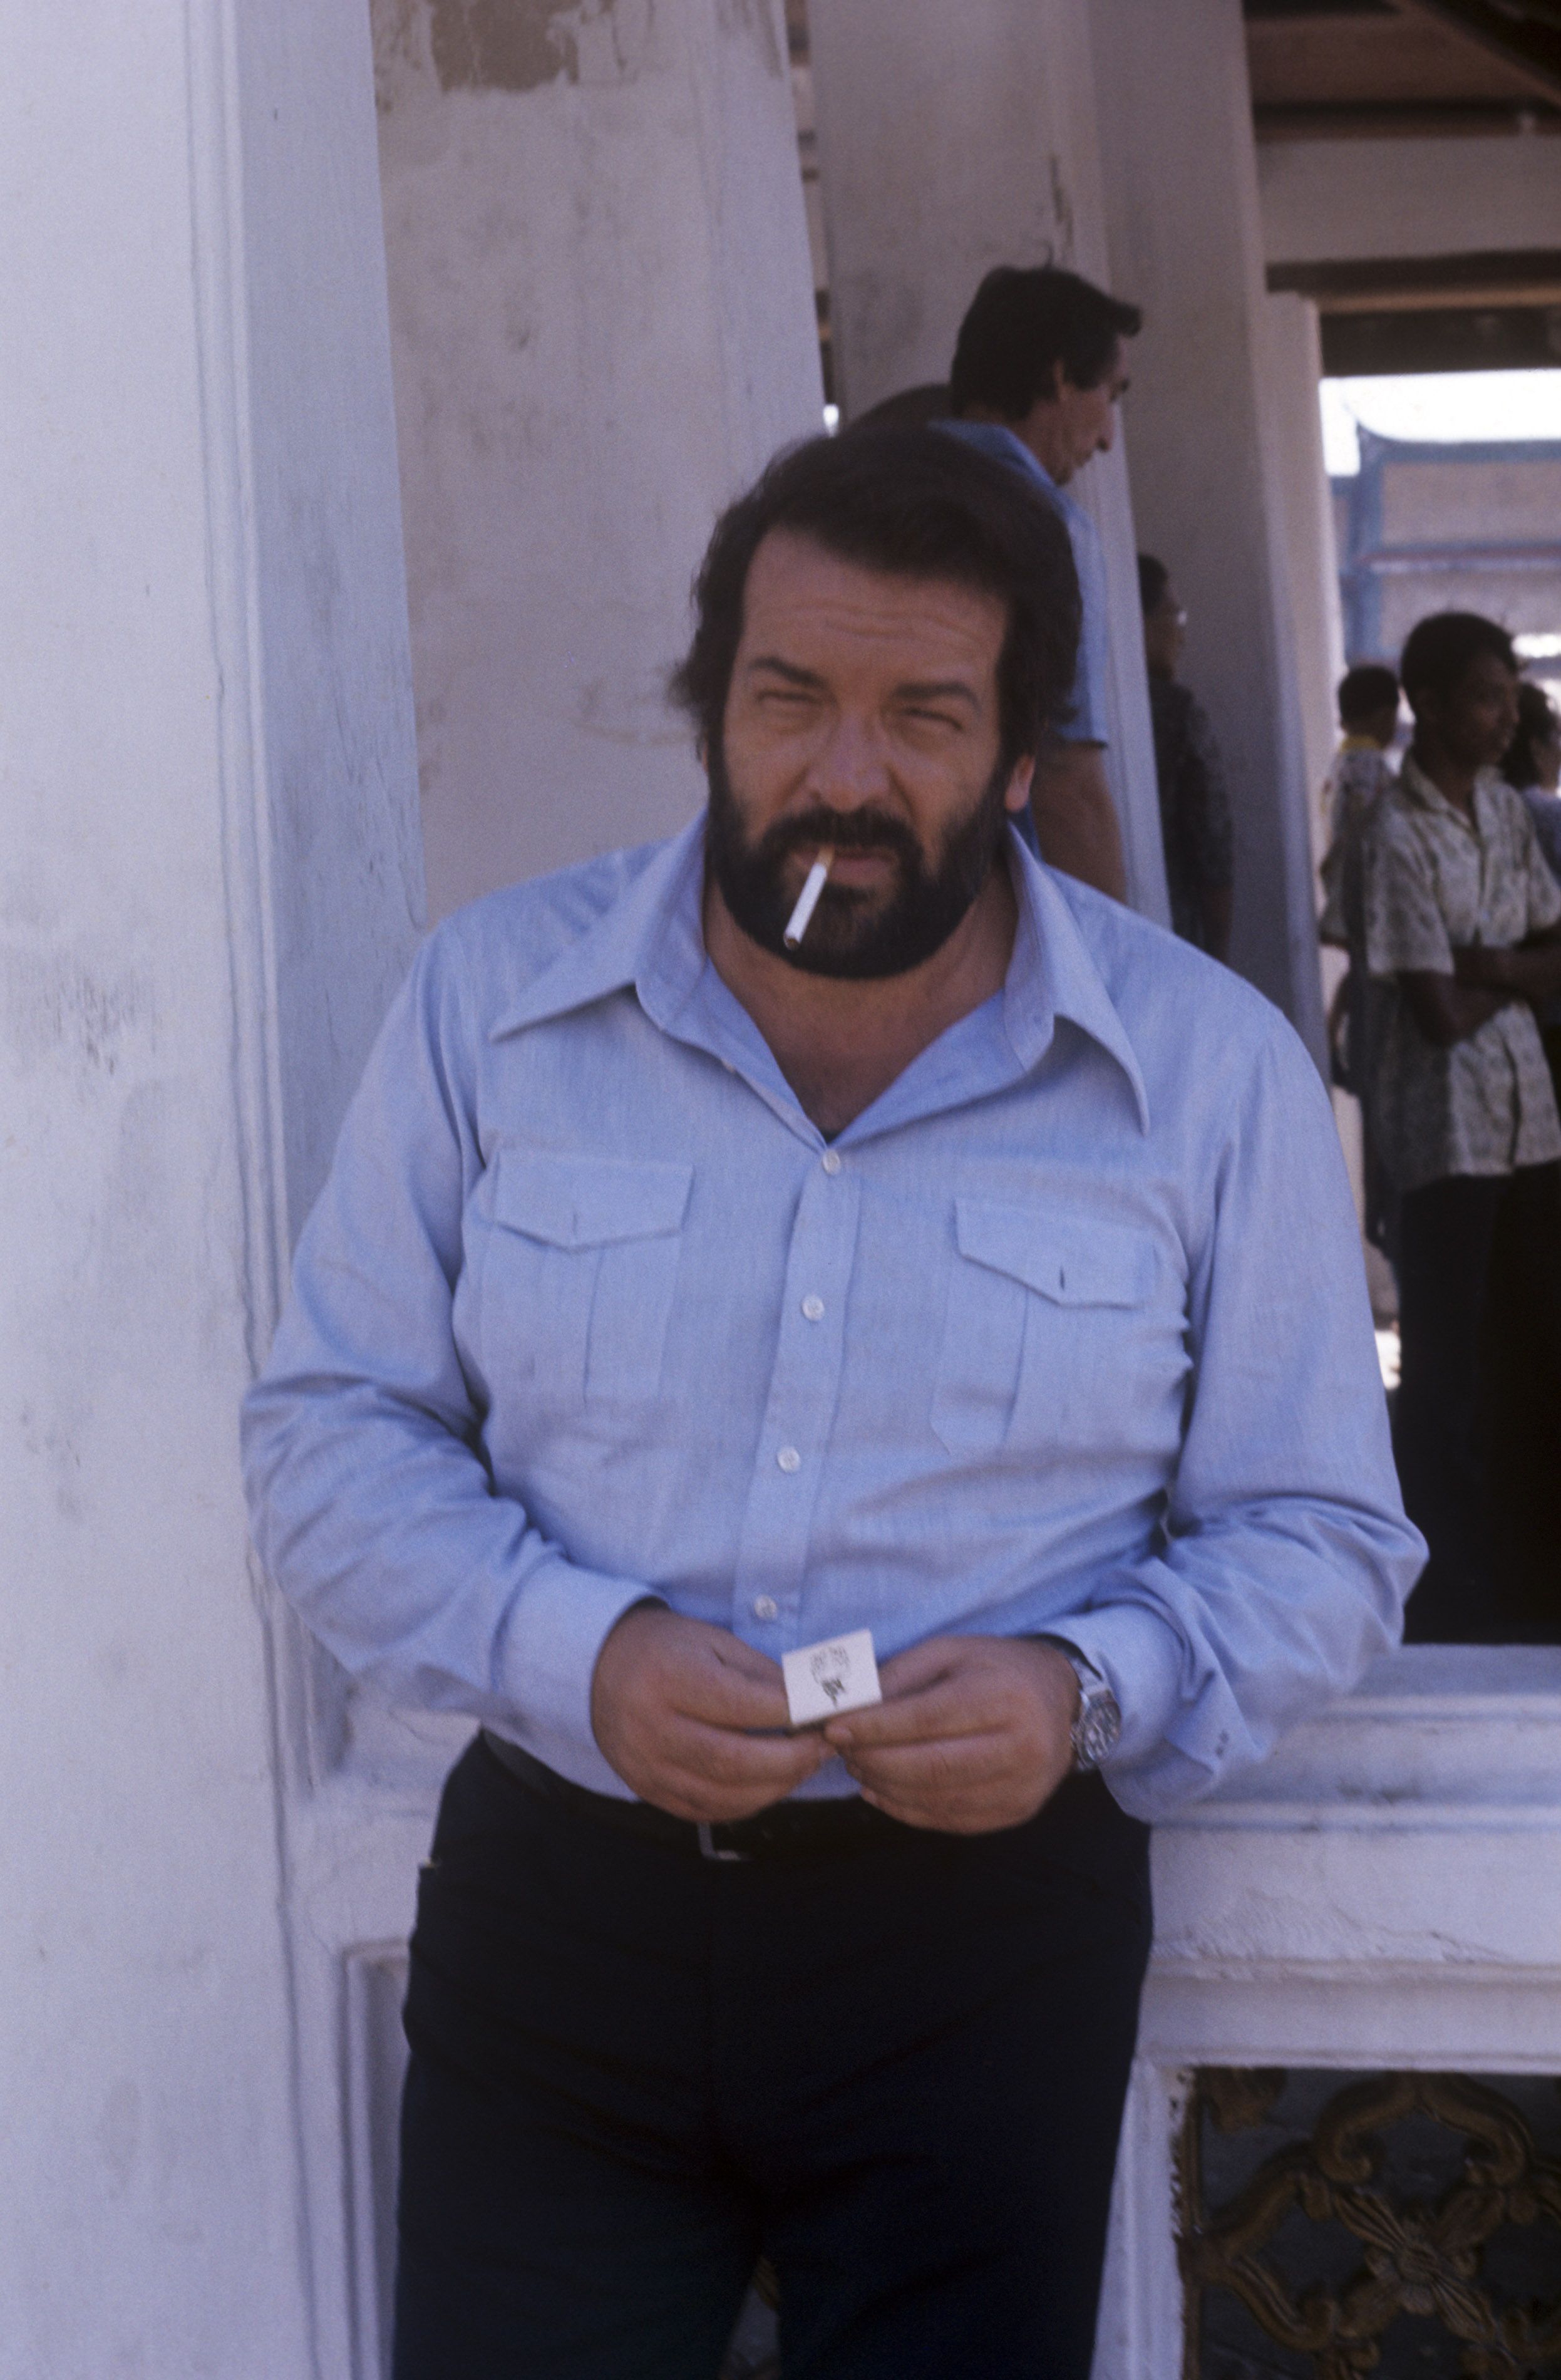 western the at 86 of age dies Bud Spencer Spaghetti star